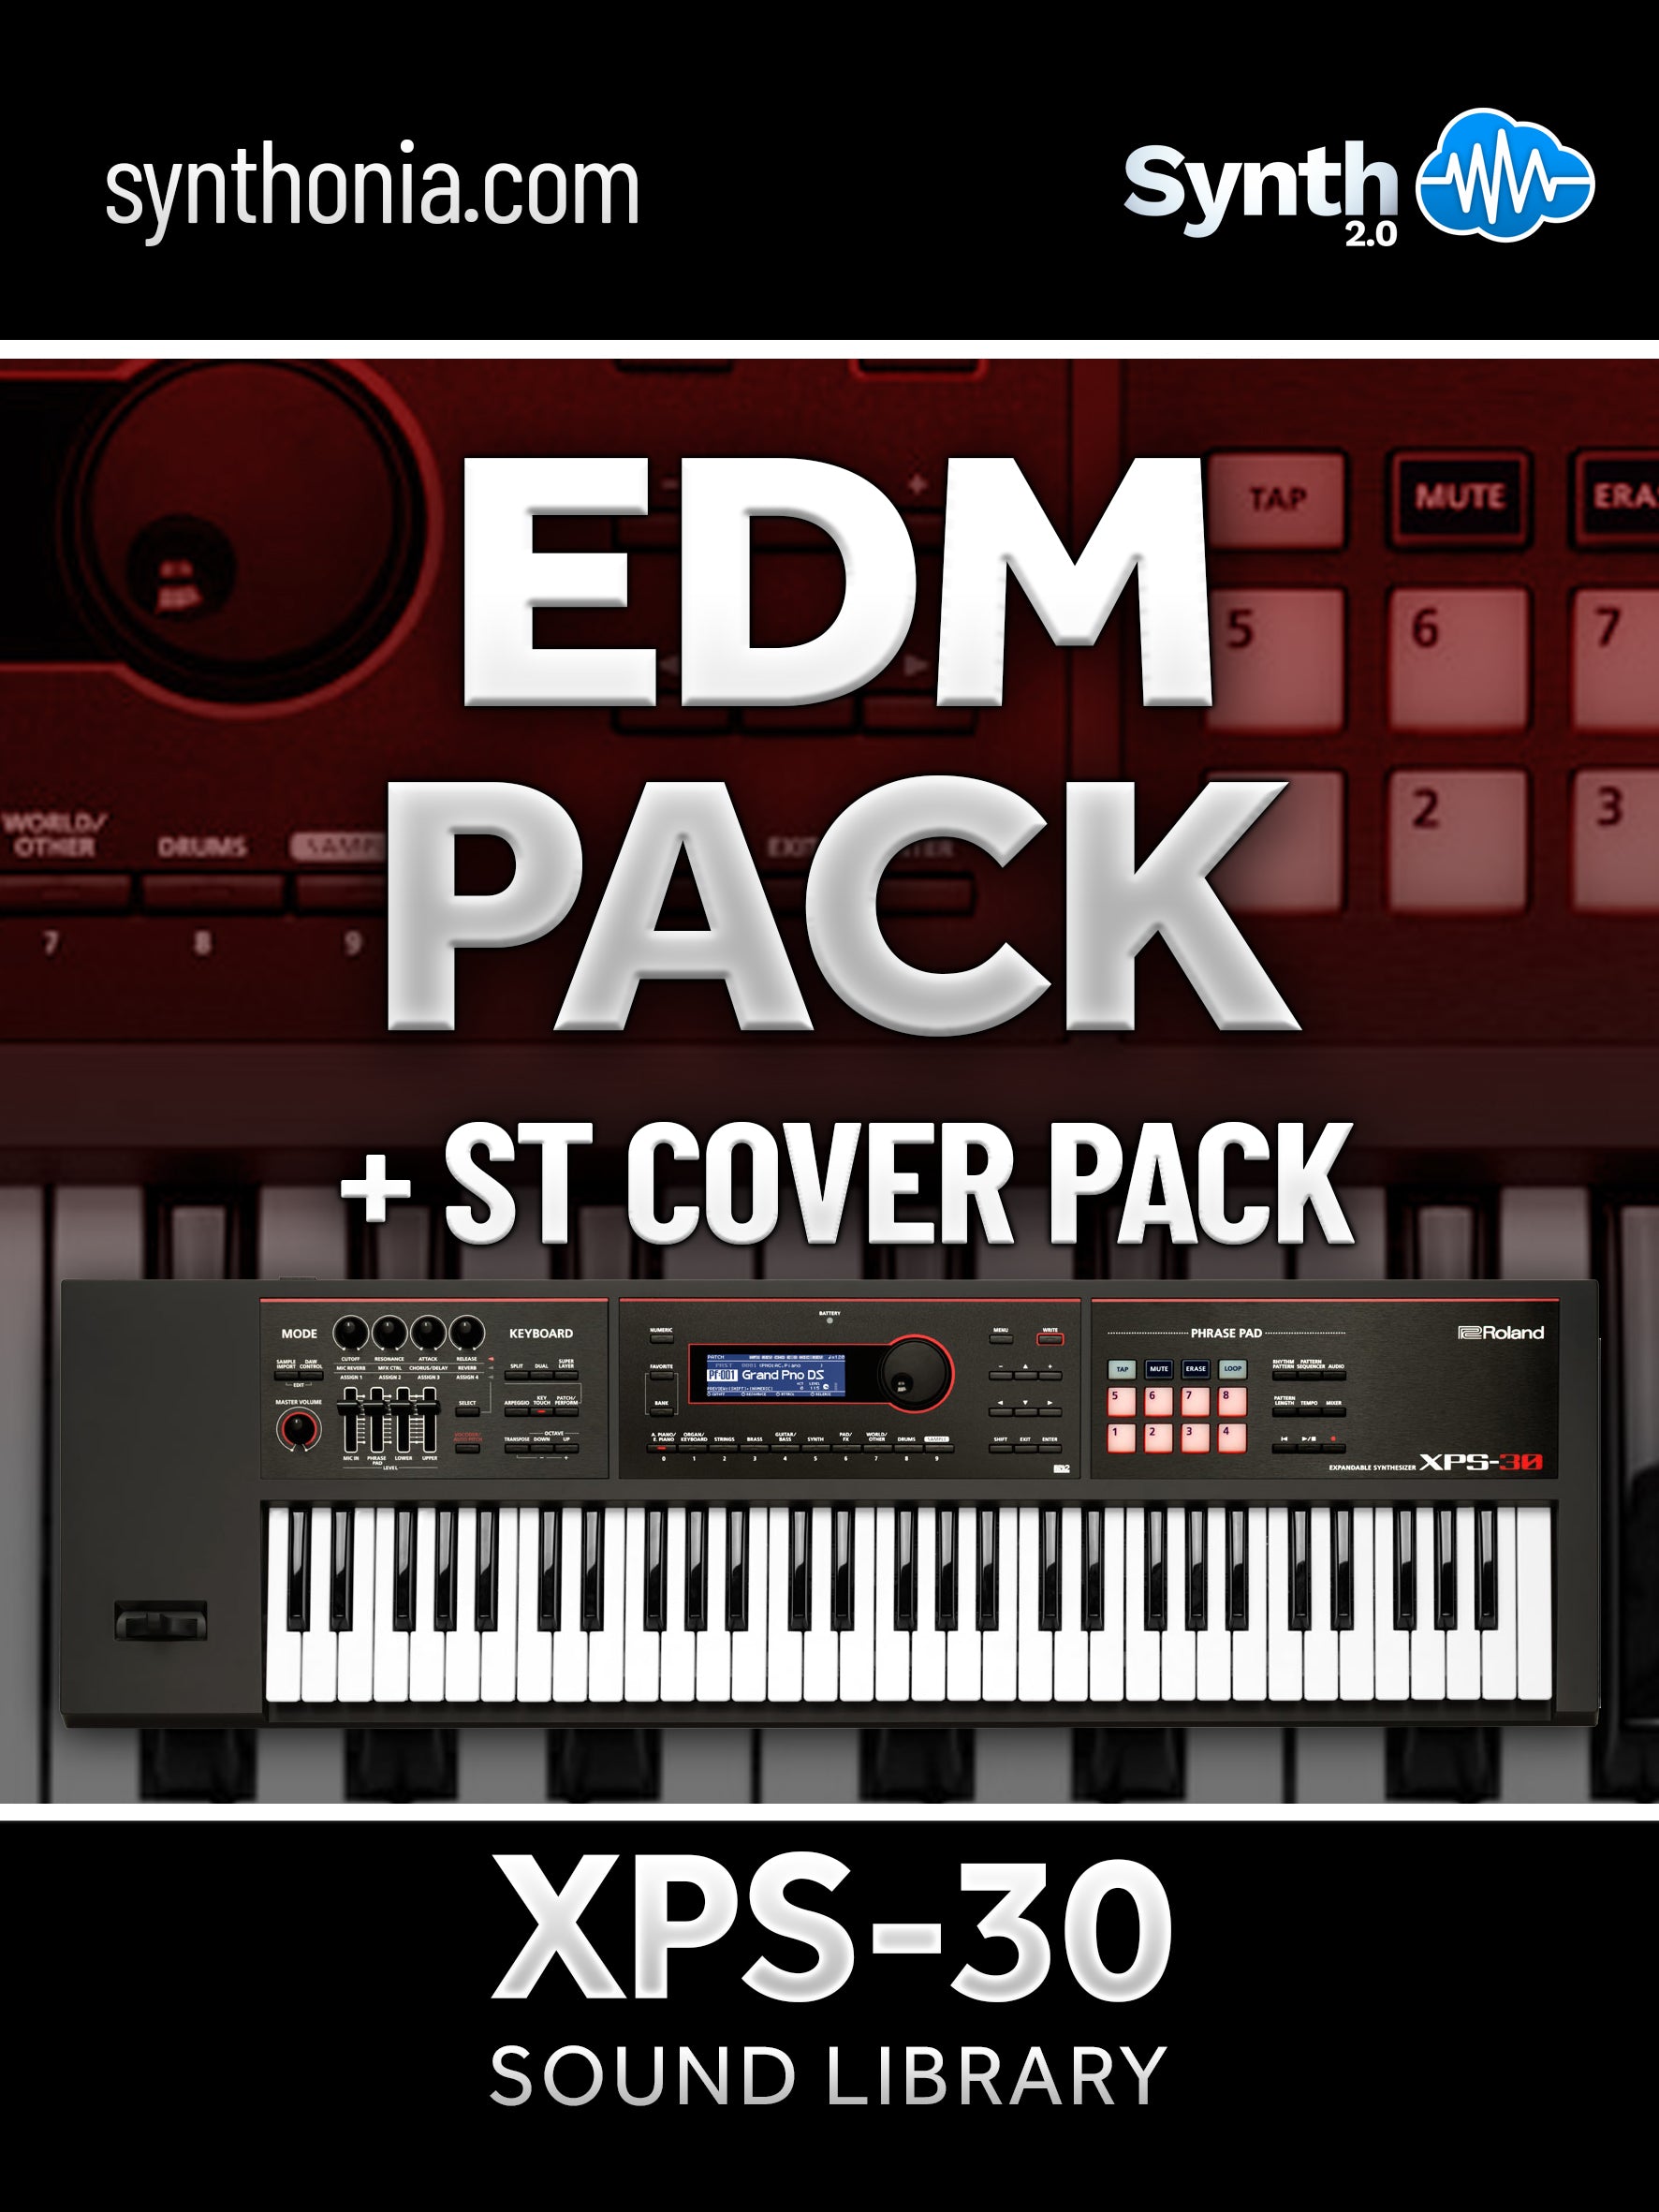 SCL088 - EDM Pack + STRANGER THINGS Cover Pack - XPS-30 ( 16 presets )